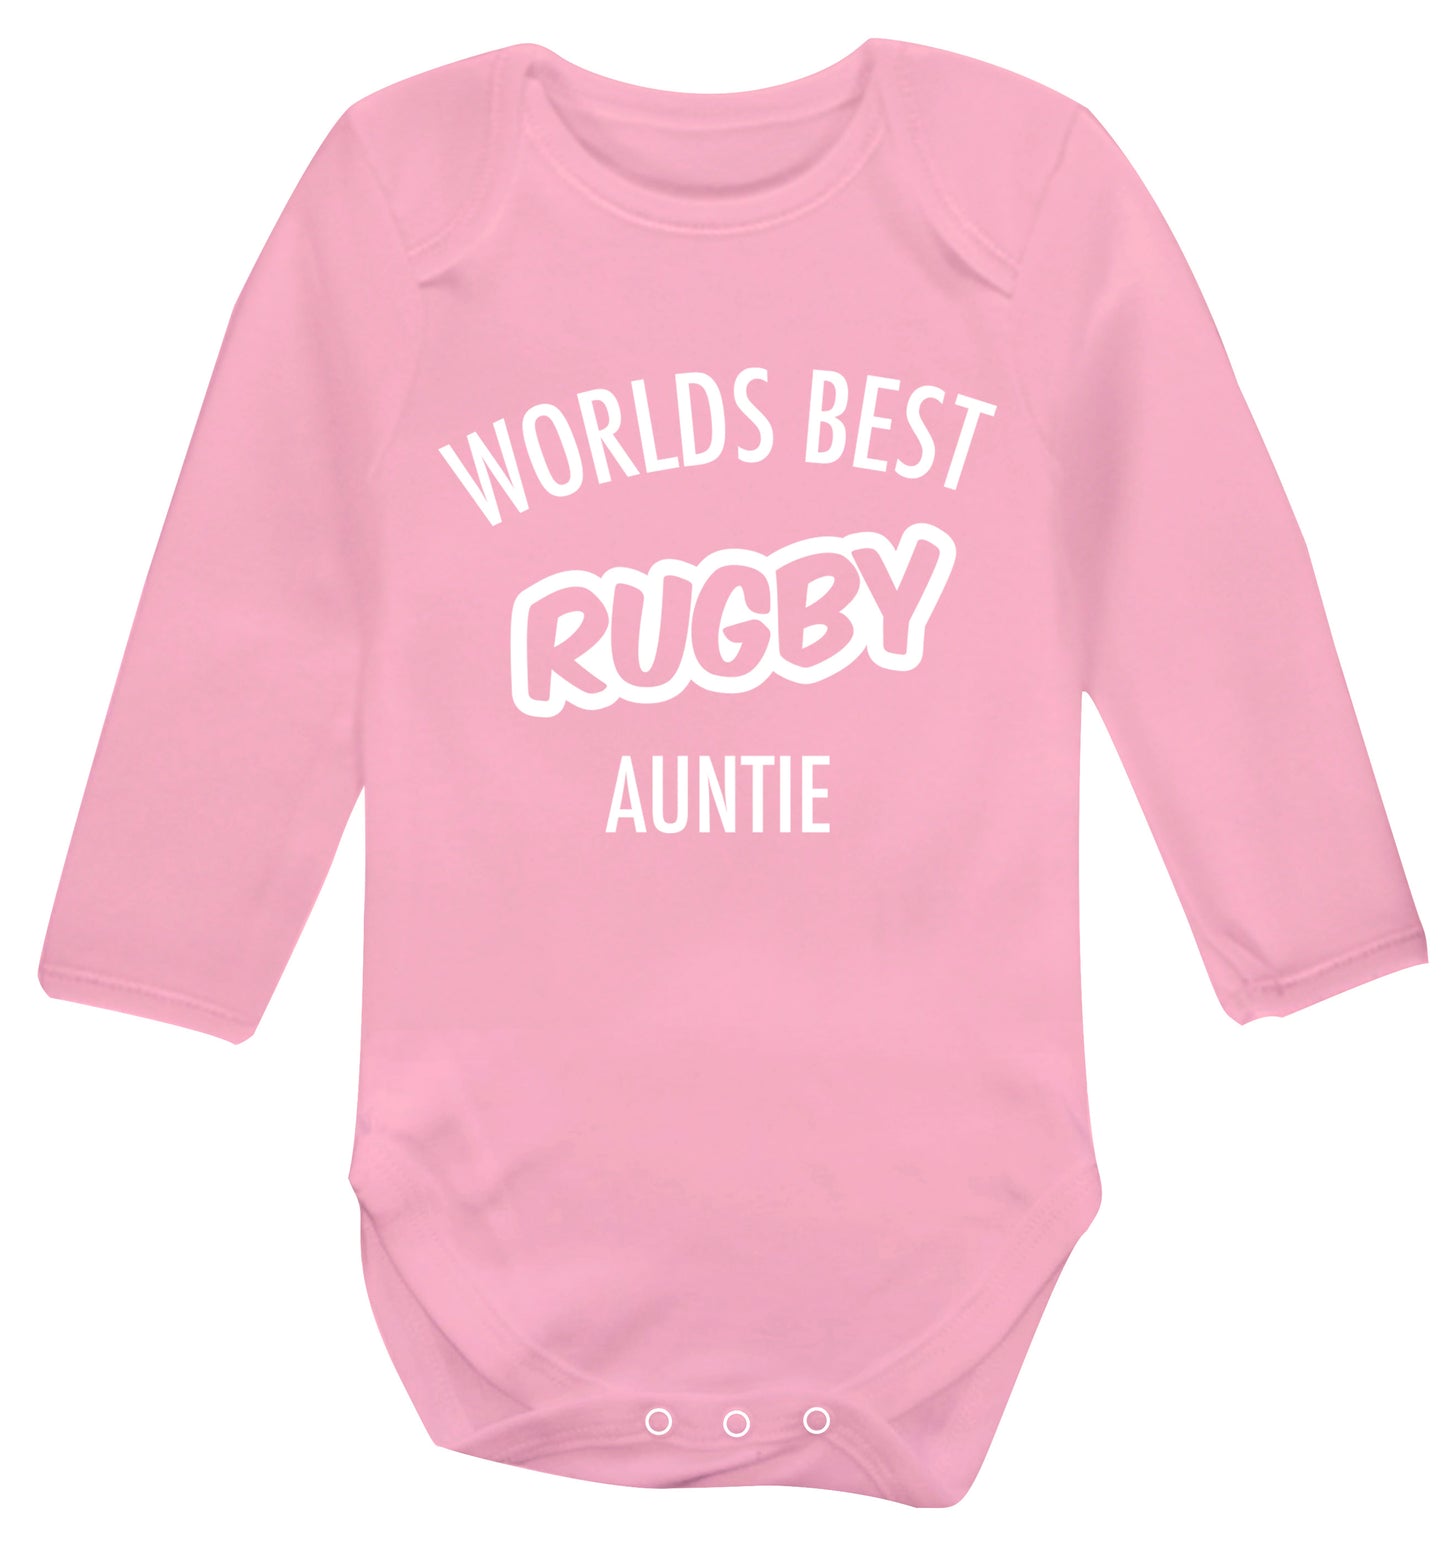 Worlds best rugby auntie Baby Vest long sleeved pale pink 6-12 months